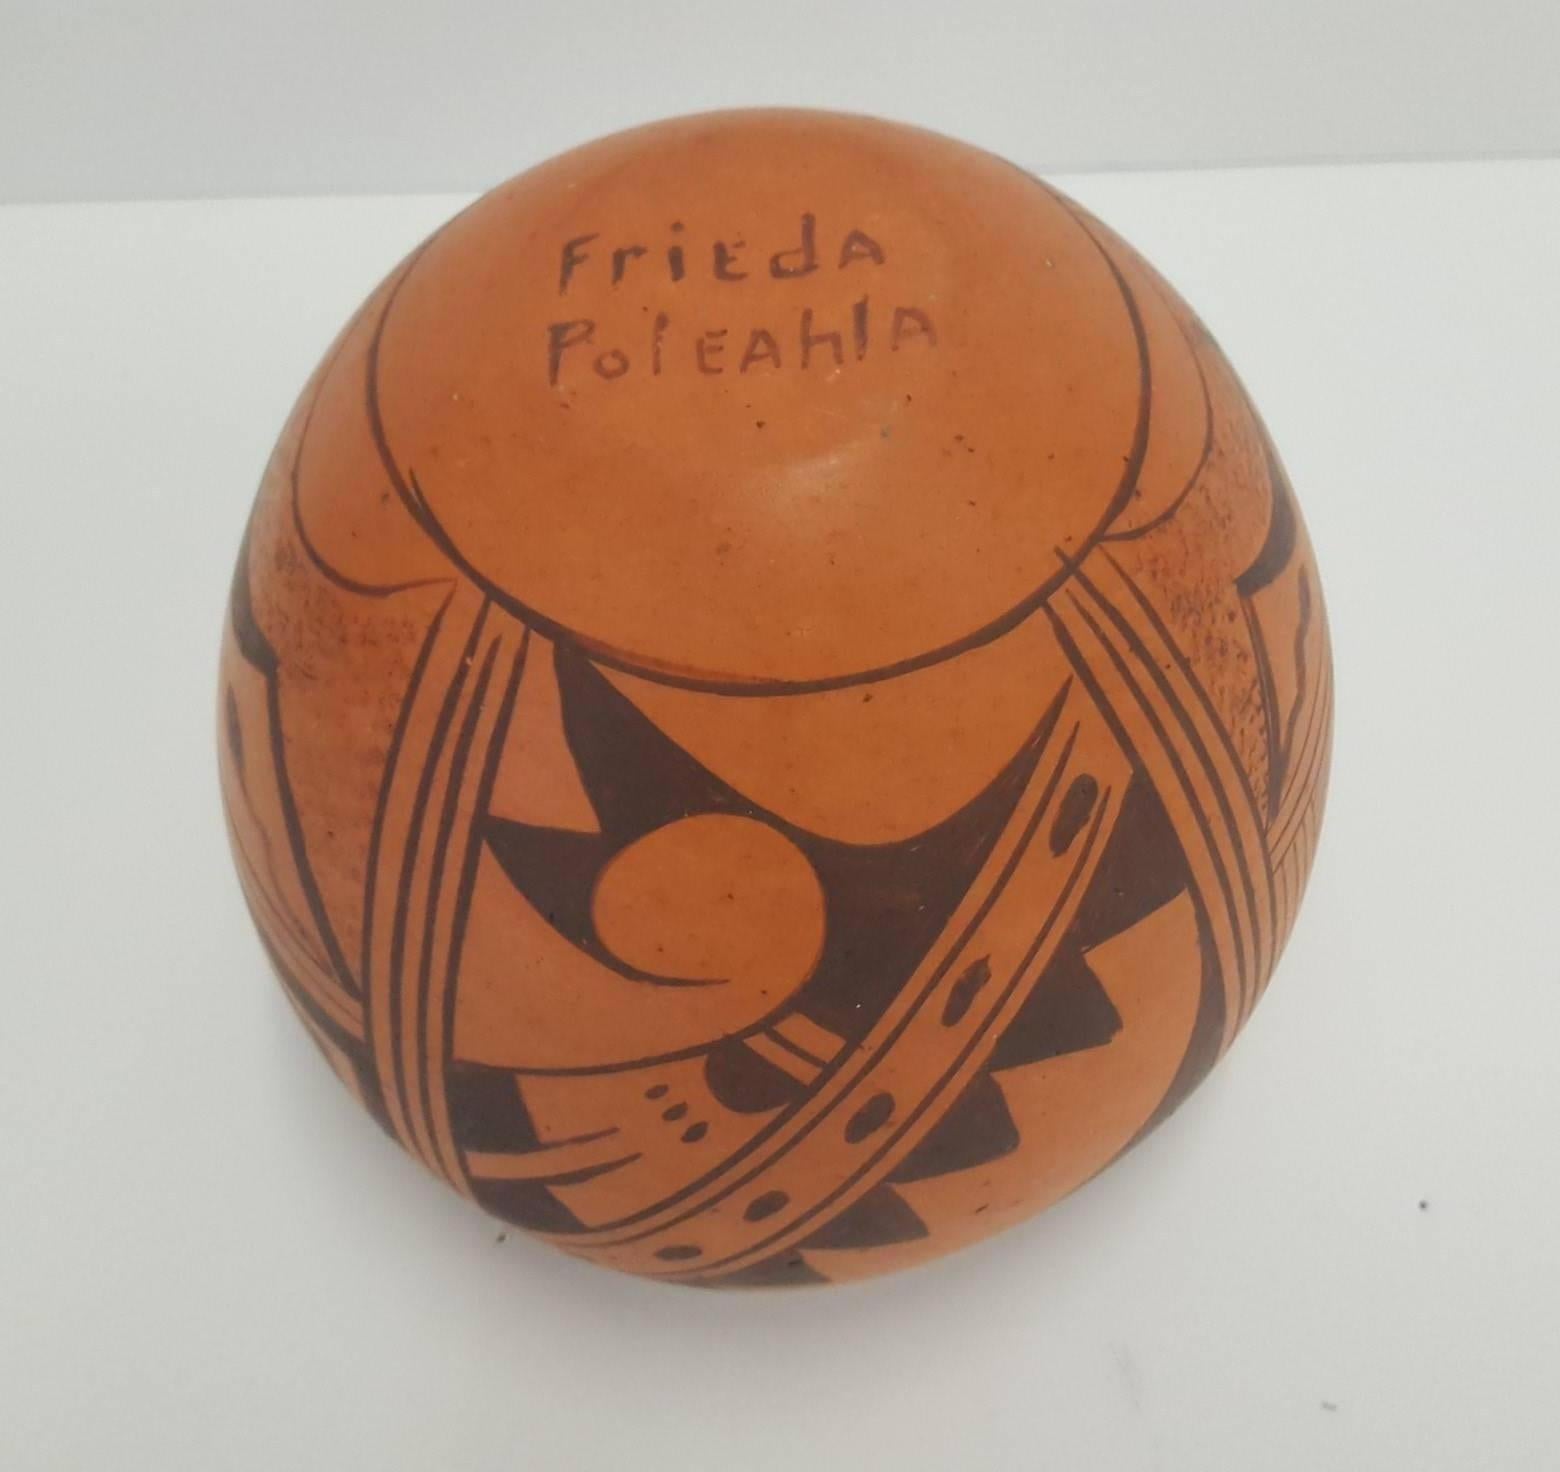 A small, red clay bowl, painted with black graphic designs, created by Hopi potter, Frieda Poleahla circa 1960.
This pottery bowl was purchased at Walpi Village, First Mesa, Hopi Reservation by the current owner in 1982.
The piece is in excellent